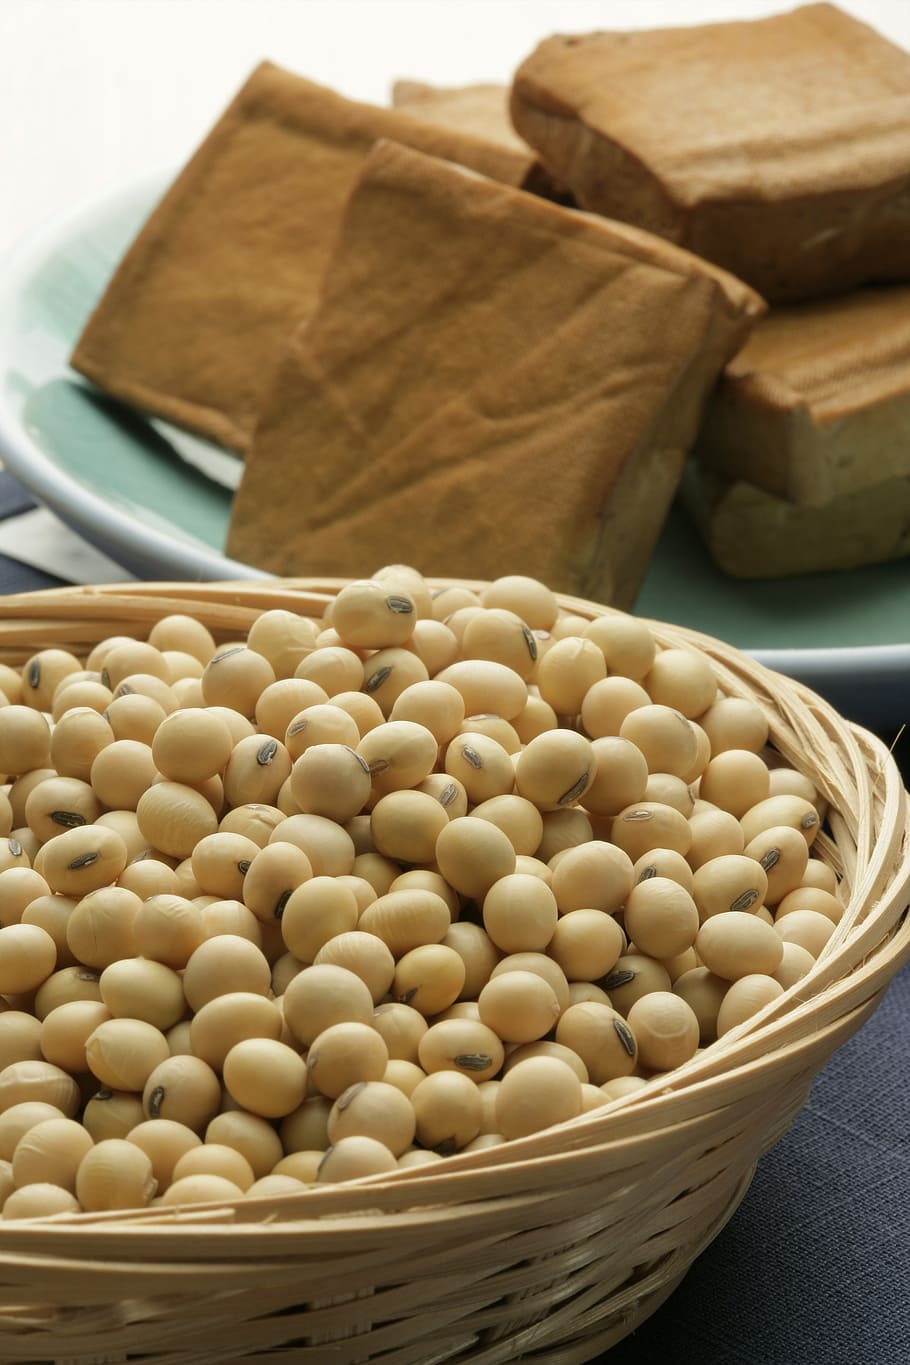 soybean, coarse cereals, grains, food, from china, freshness, food and drink, still life, container, large group of objects